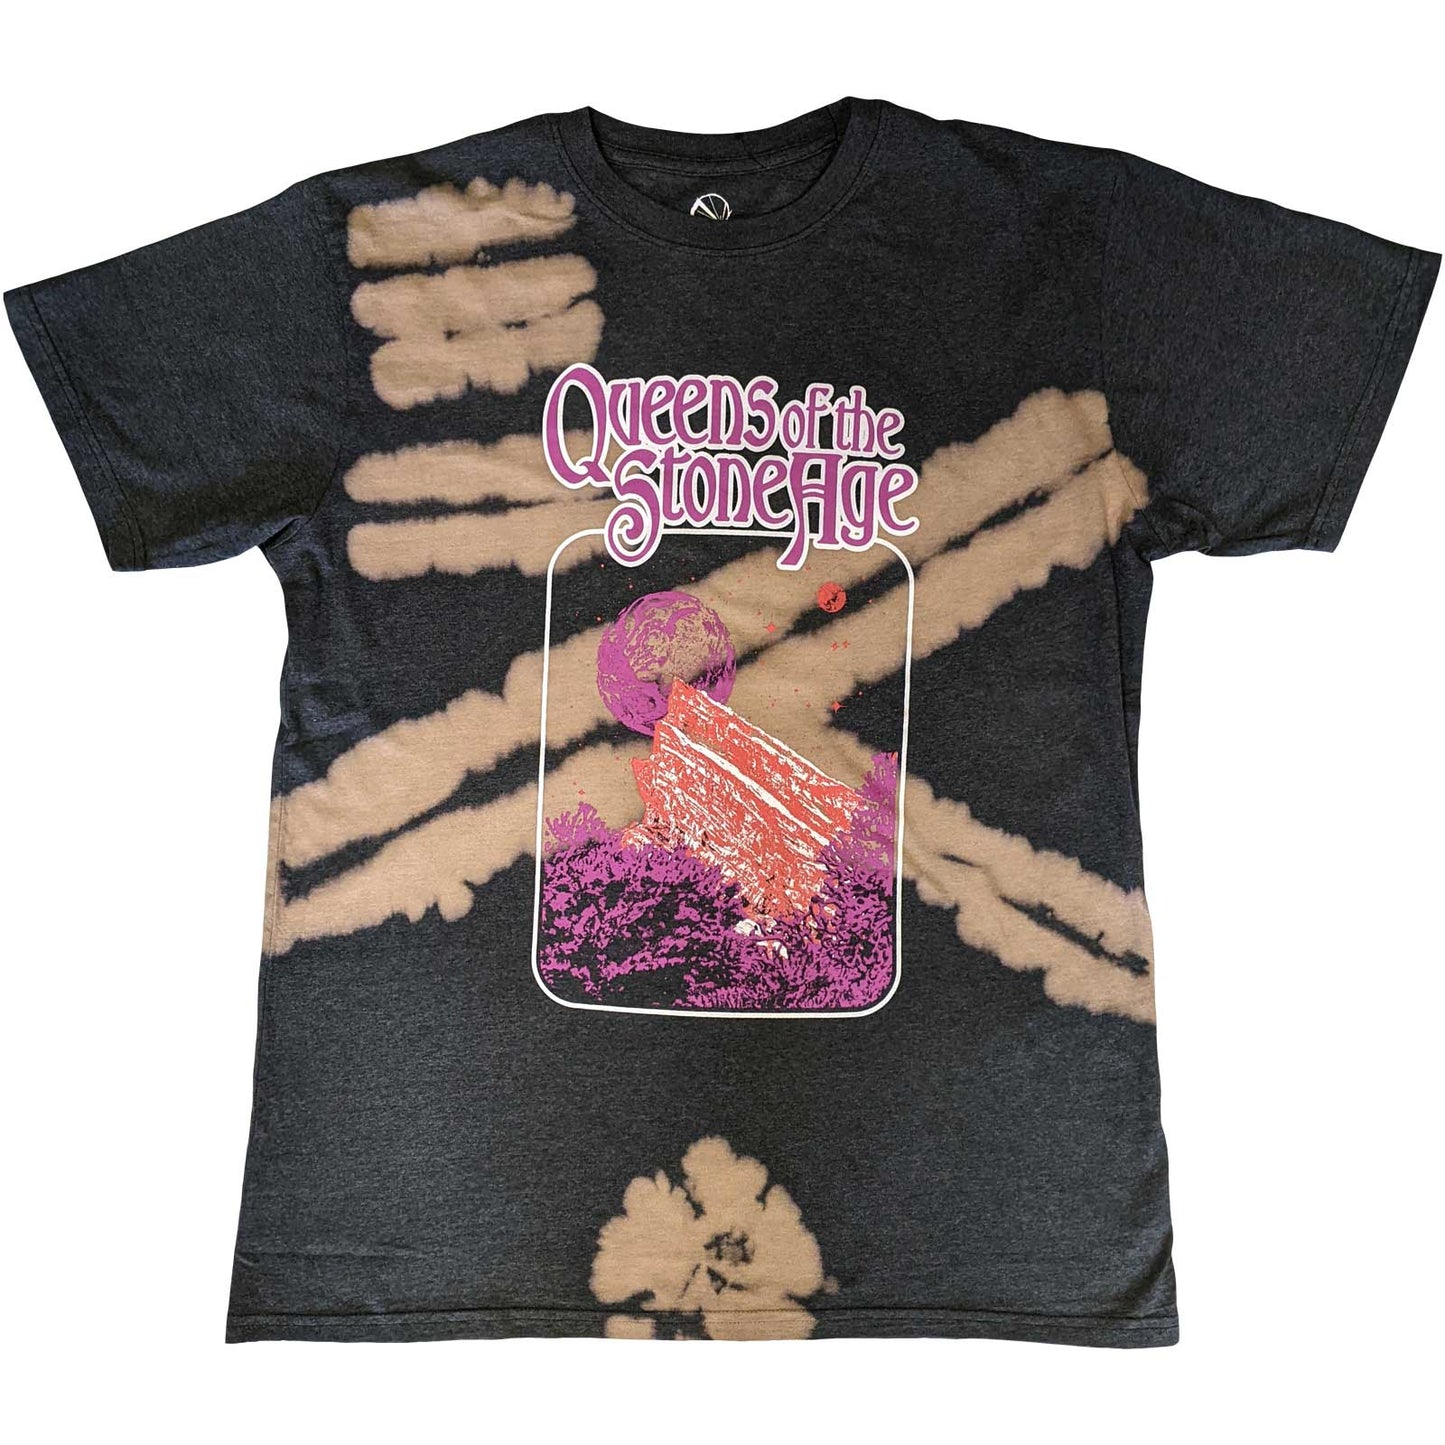 QUEENS OF THE STONE AGE - Planet Frame Dip-Dye T-Shirt